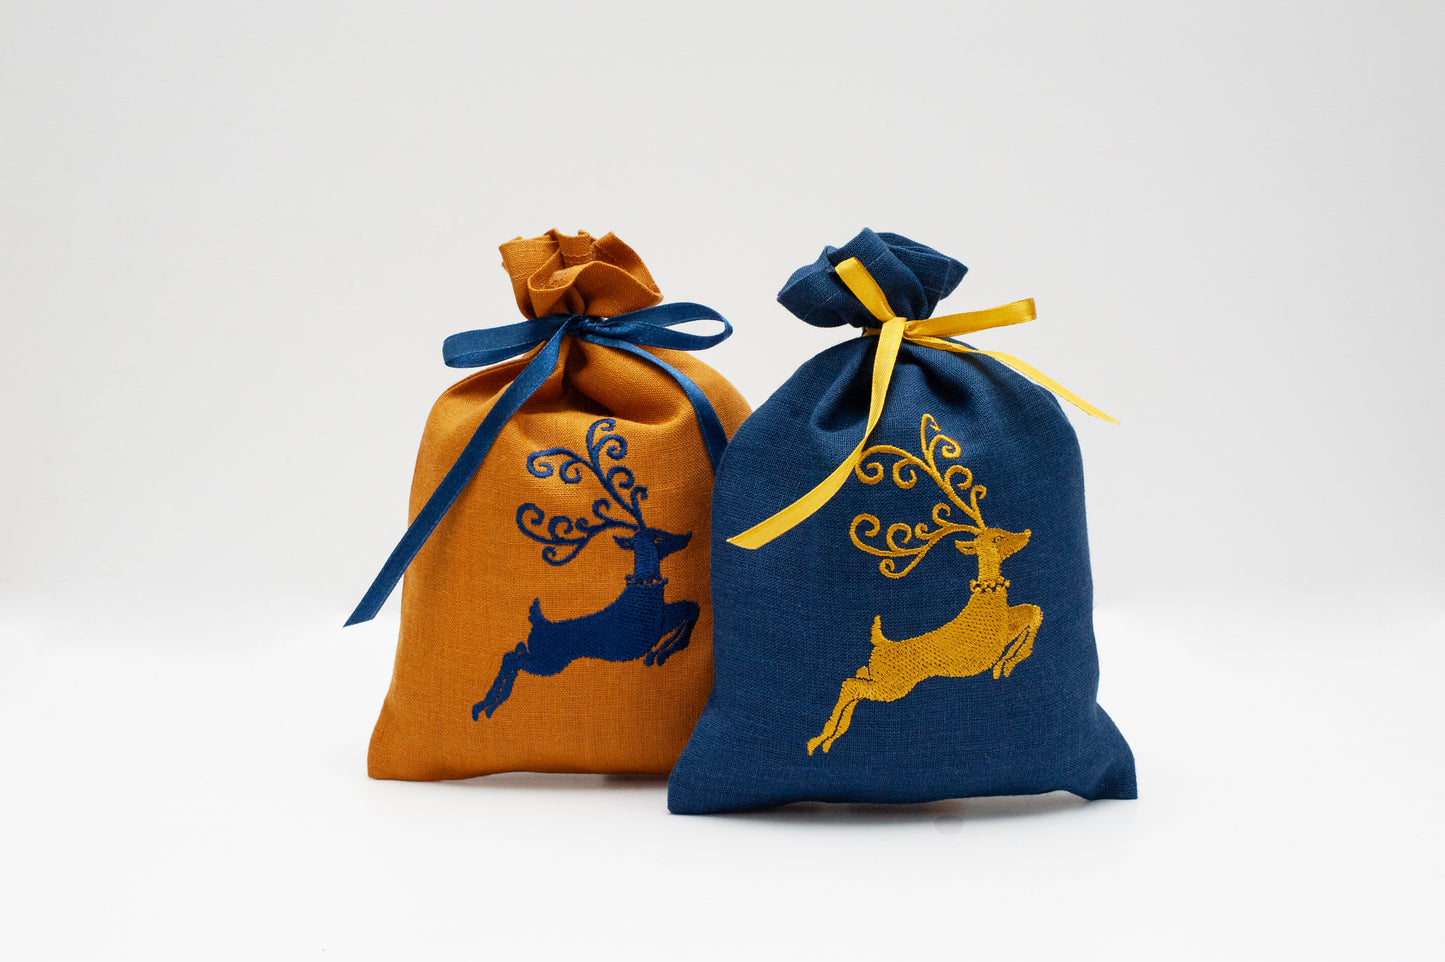 Christmas Embroidered Gift Bags navy blue color